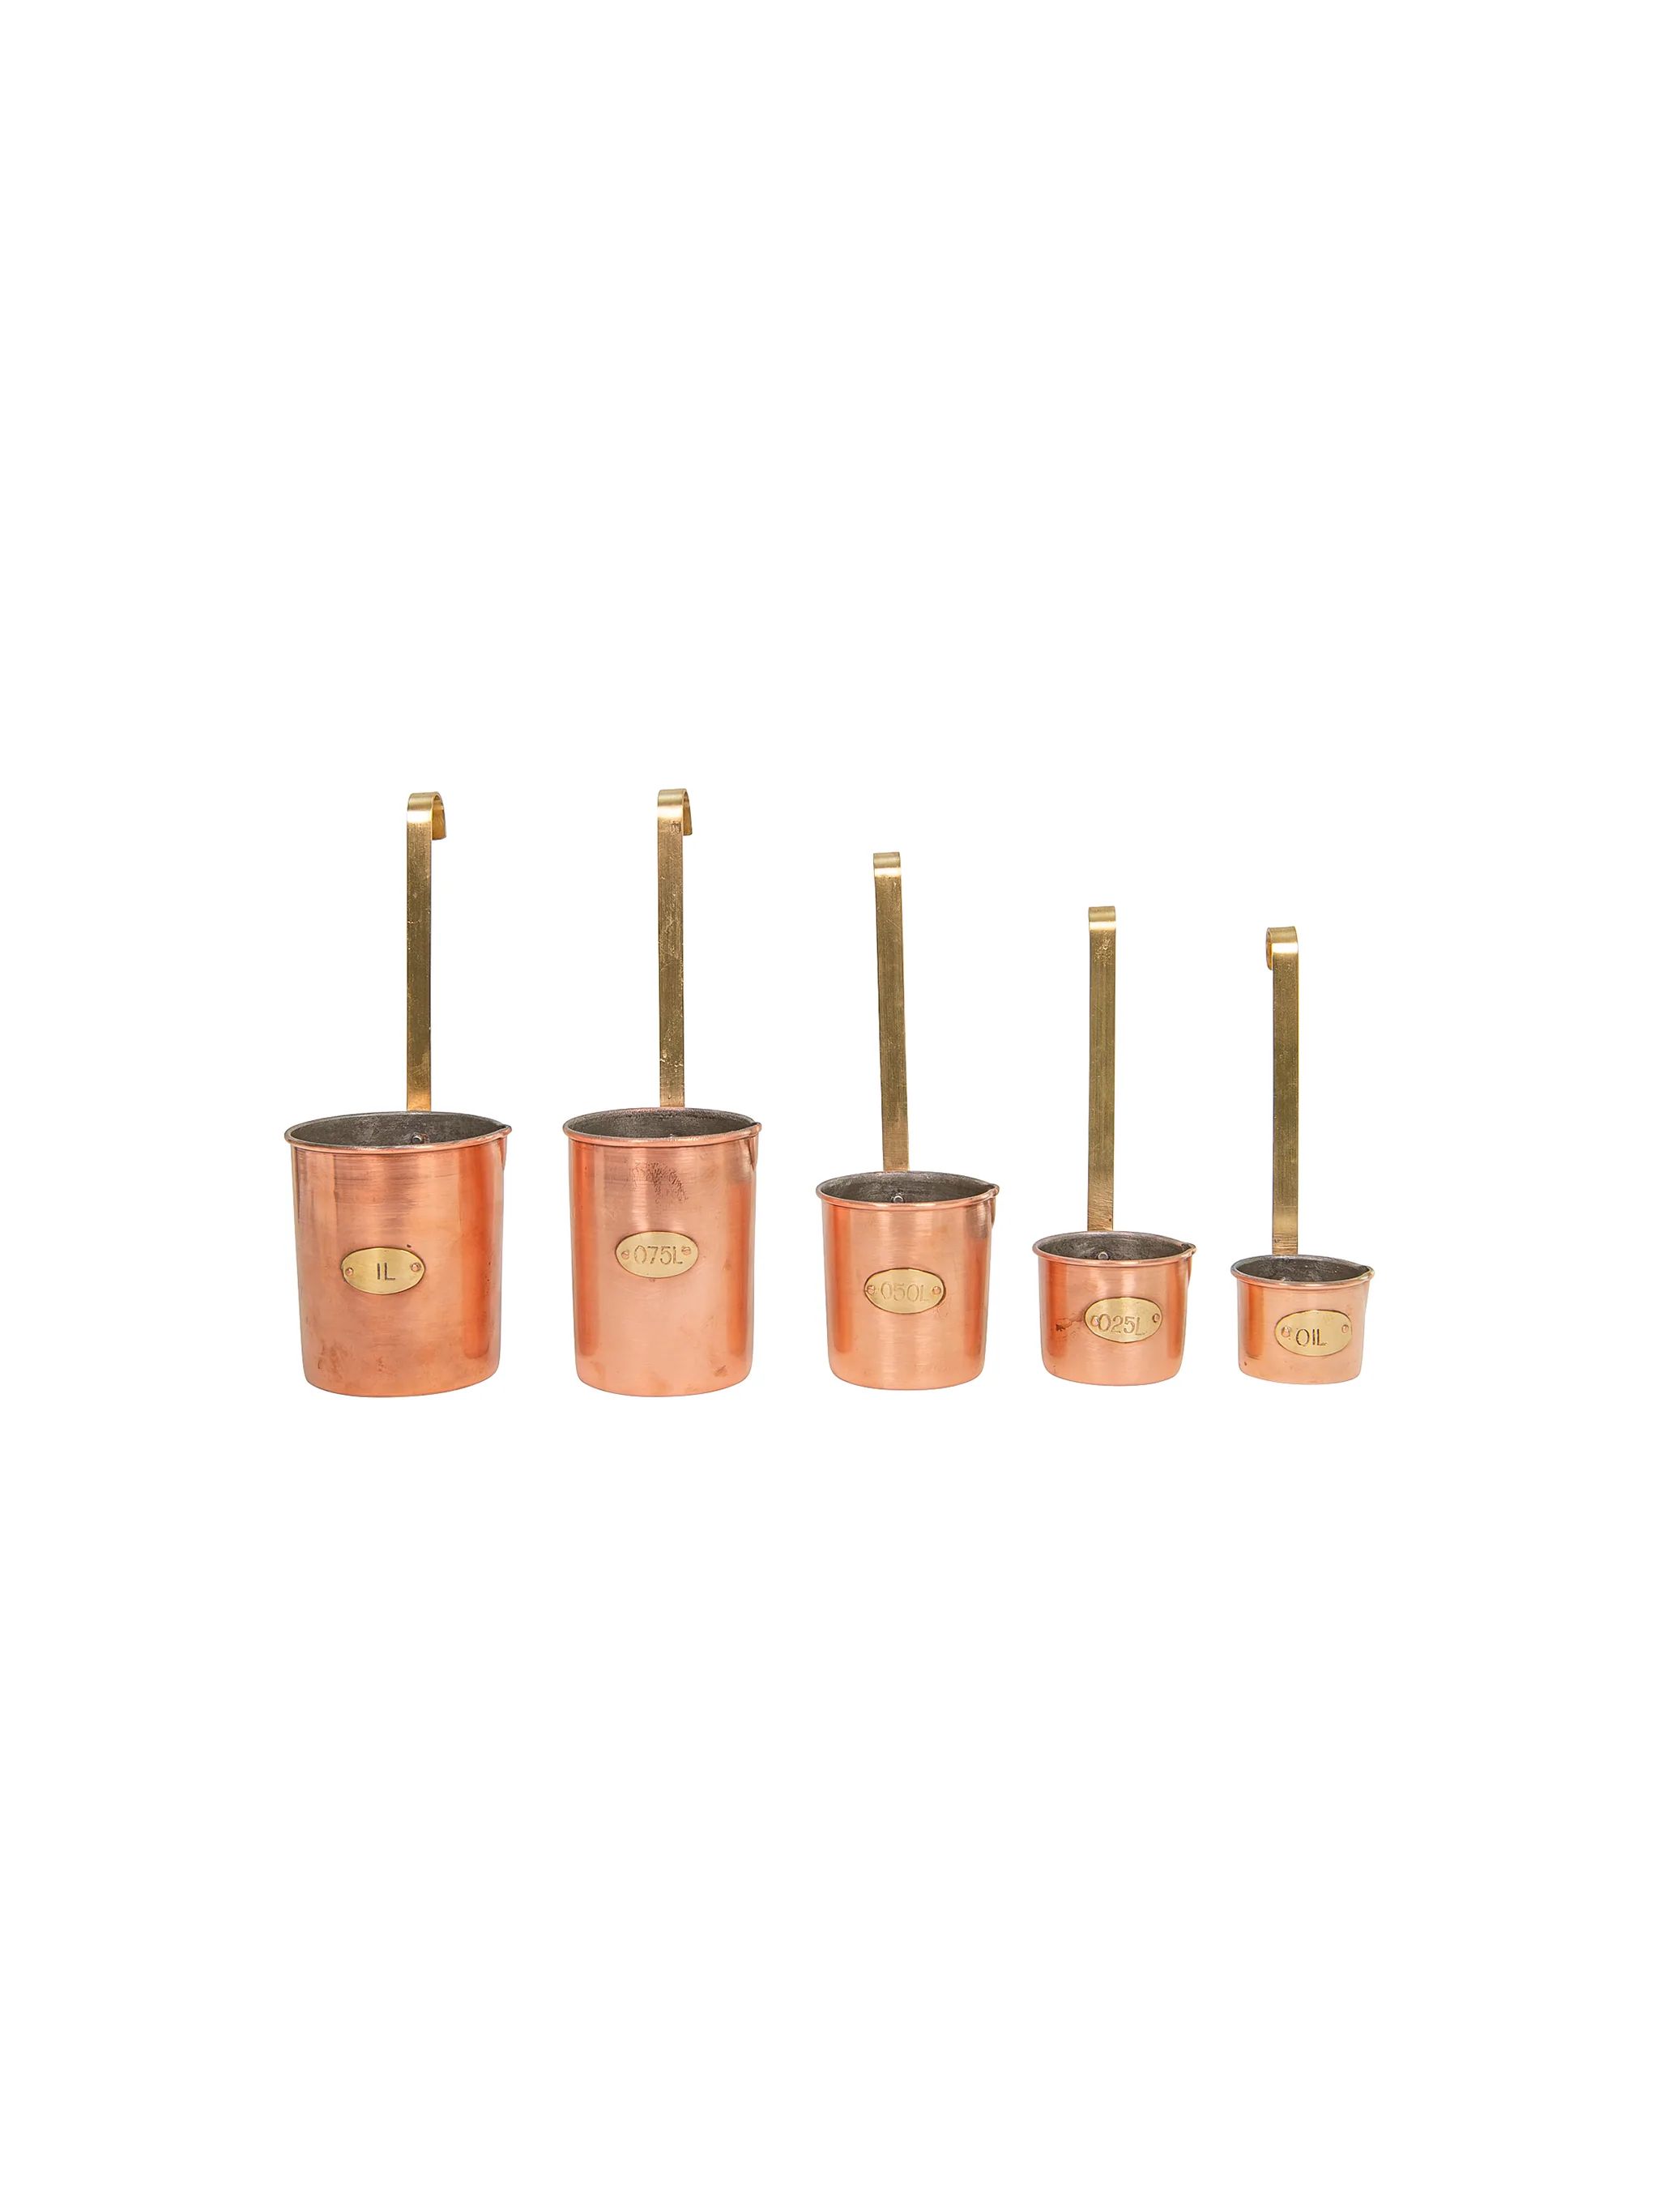 Vintage French Copper Graduated Measuring Cups | Weston Table